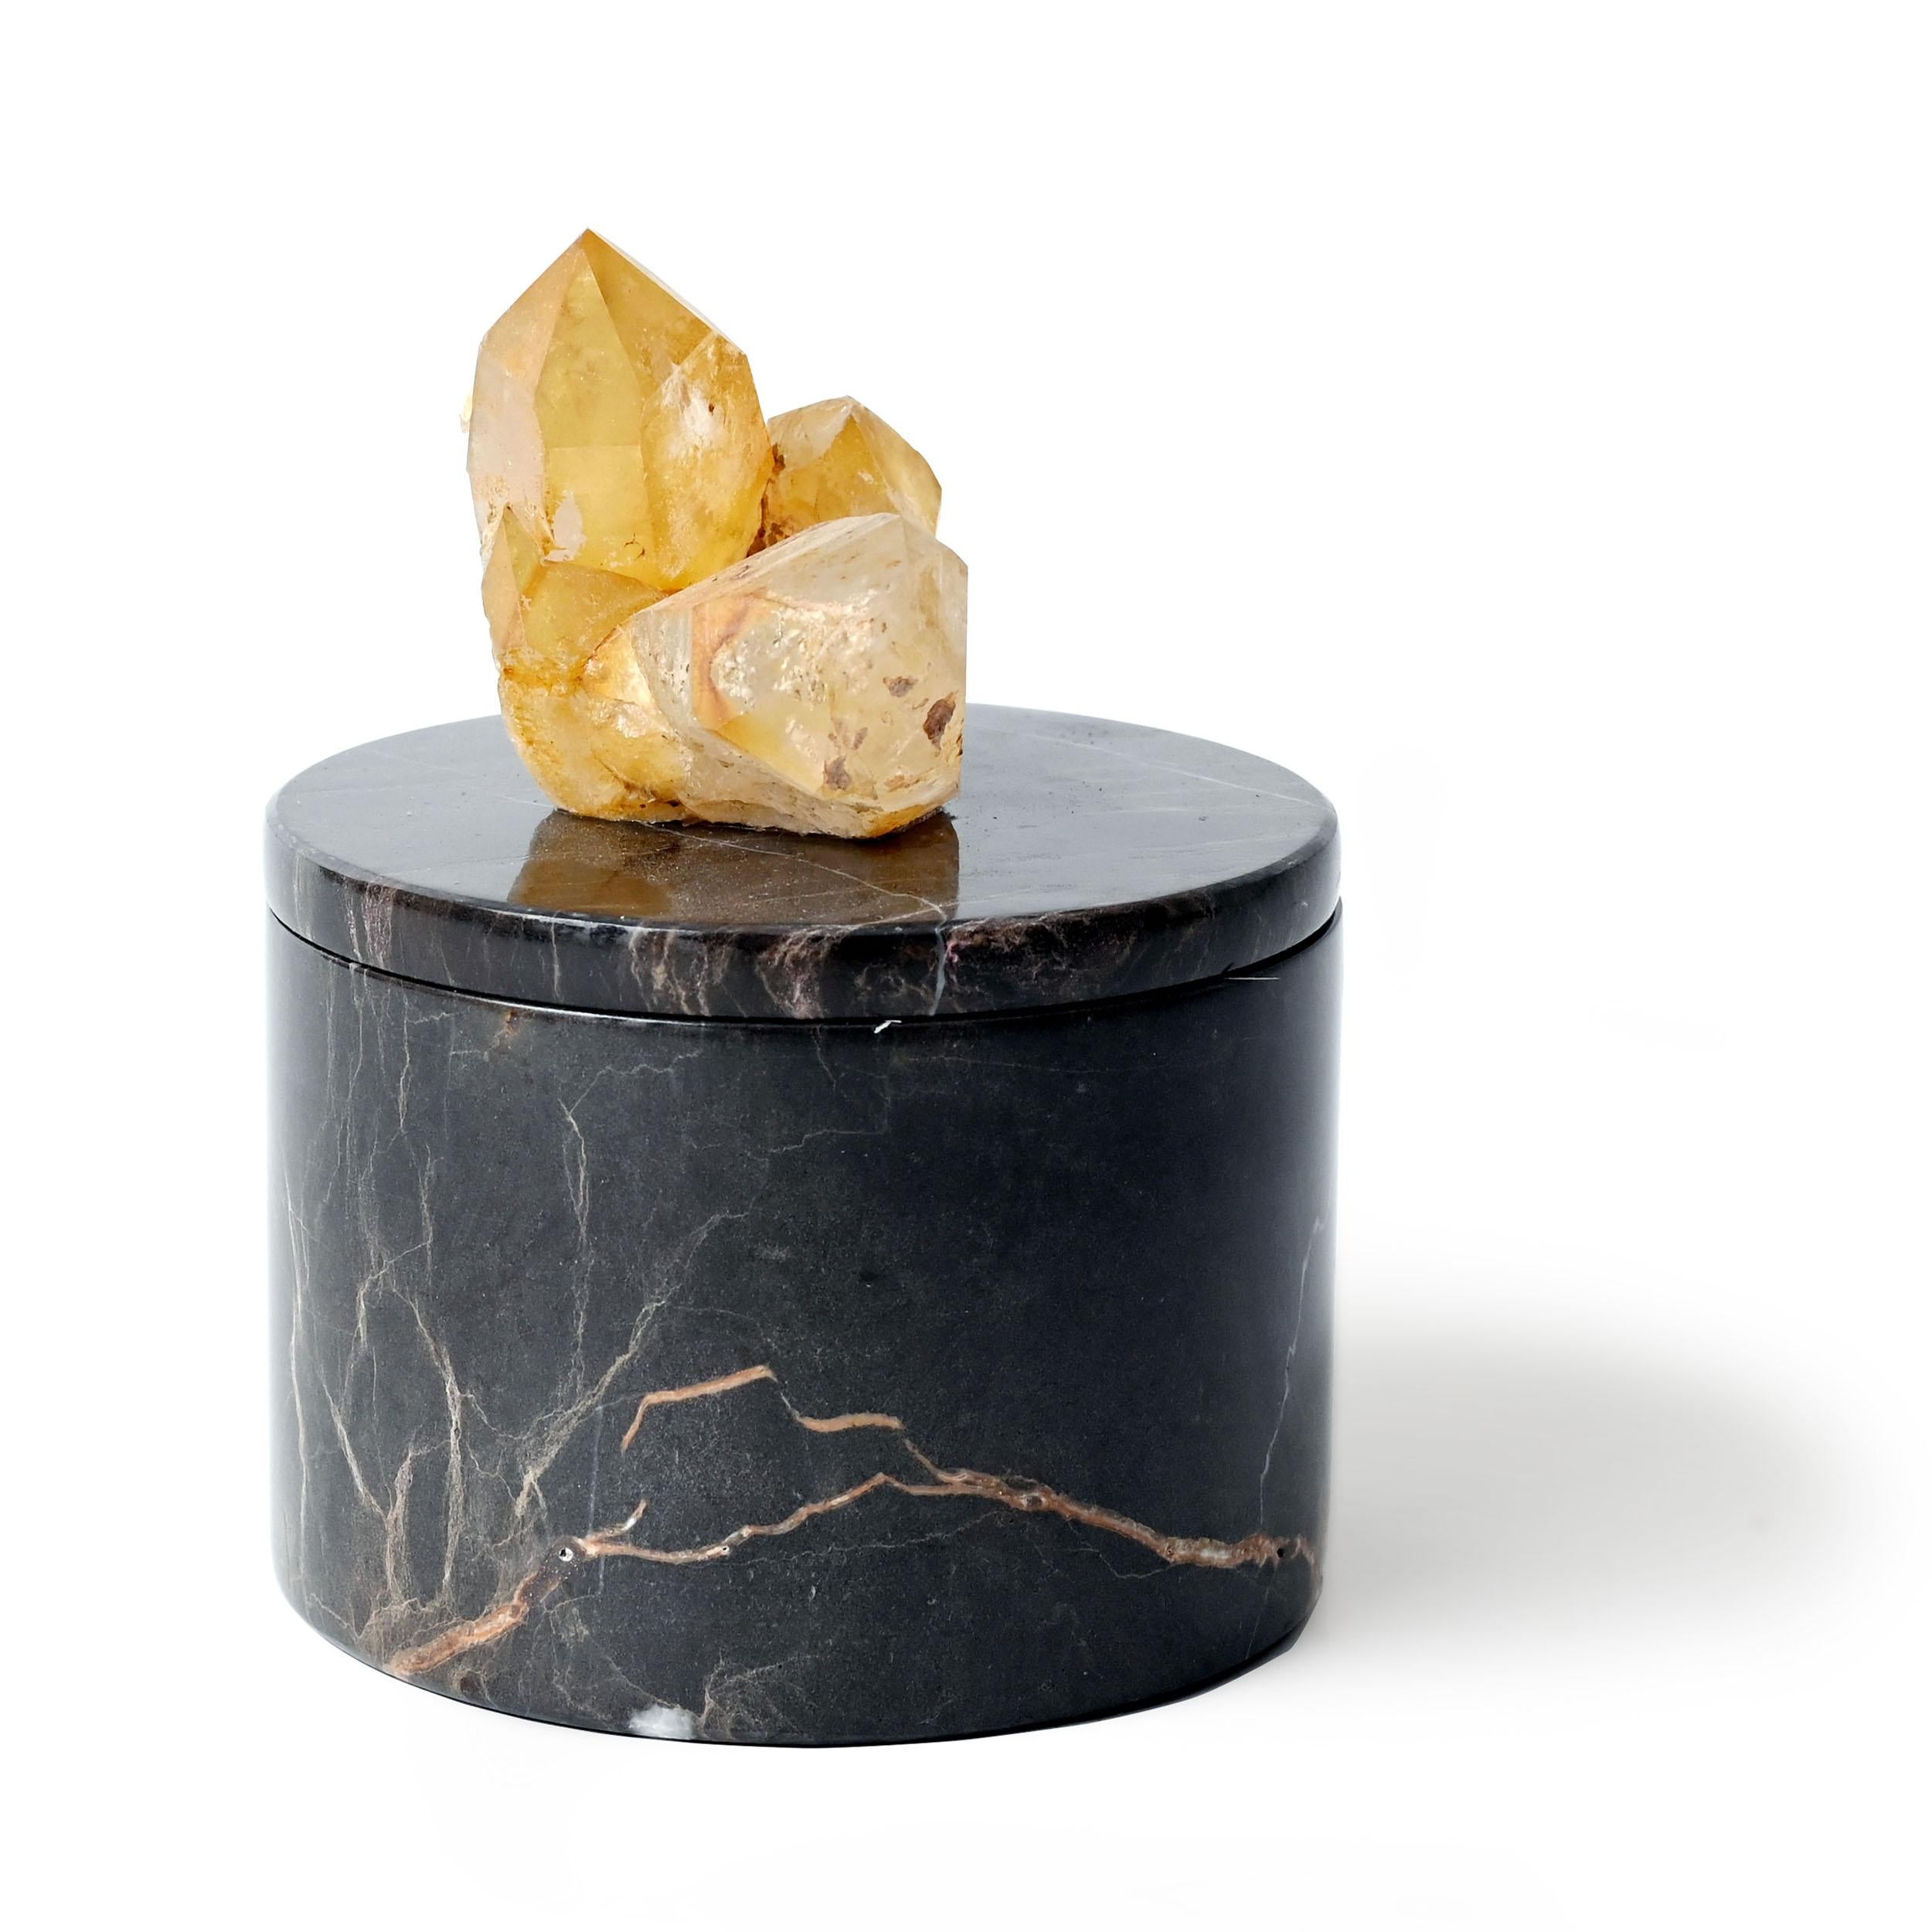 Invisible Cities box II by Studio Lel
Dimensions: D 10 x H 7 cm
Materials: Crystal quartz, marble

These are handmade from semiprecious stone and marble in a small artisanal workshop. Please note that variations and slight imperfections are part of